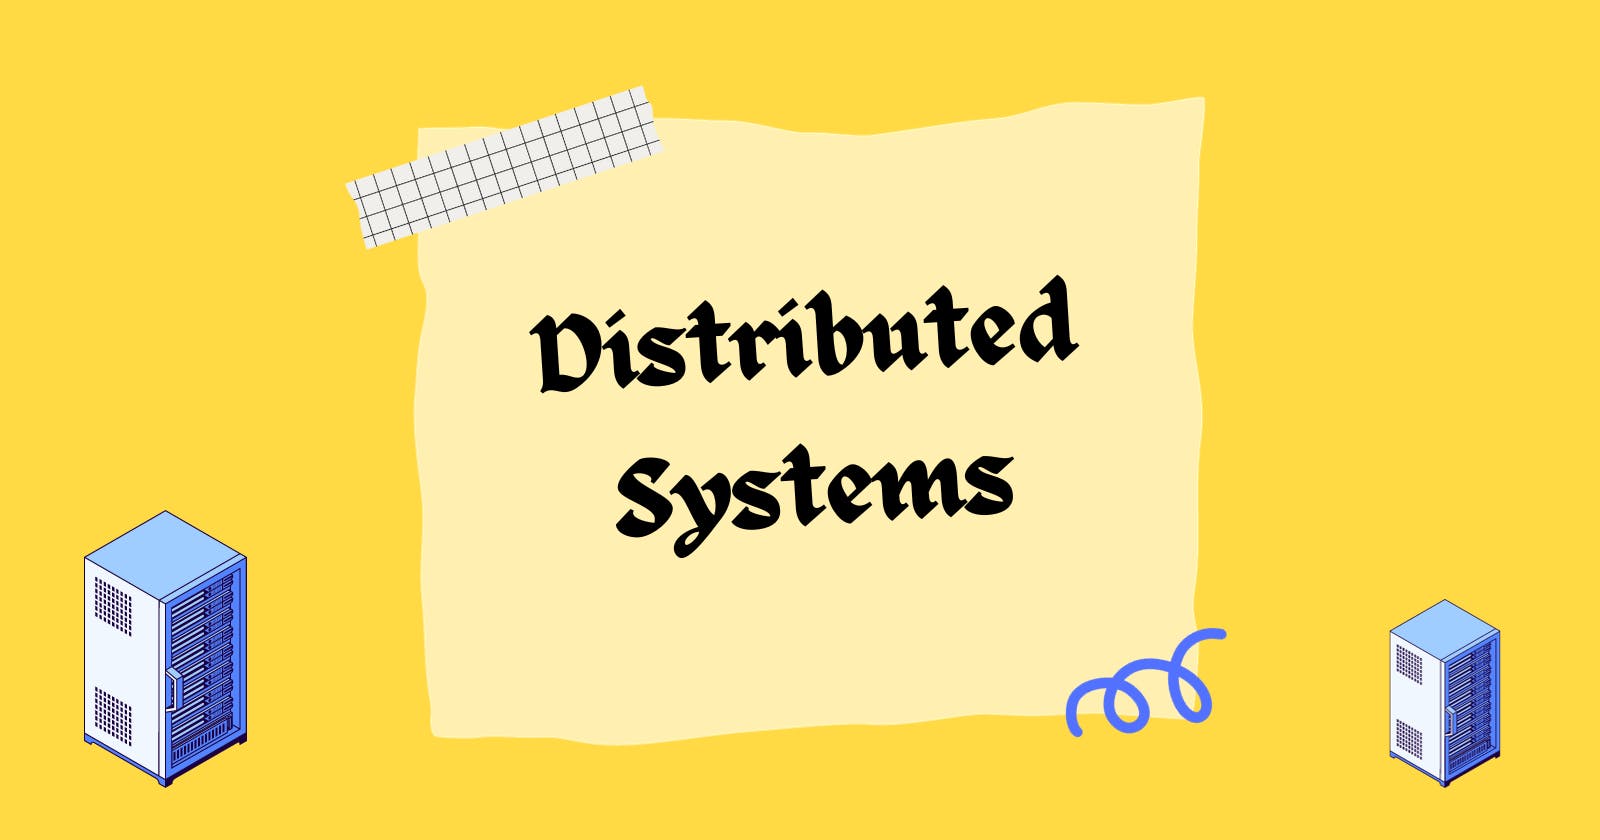 Distributed Systems: Processes